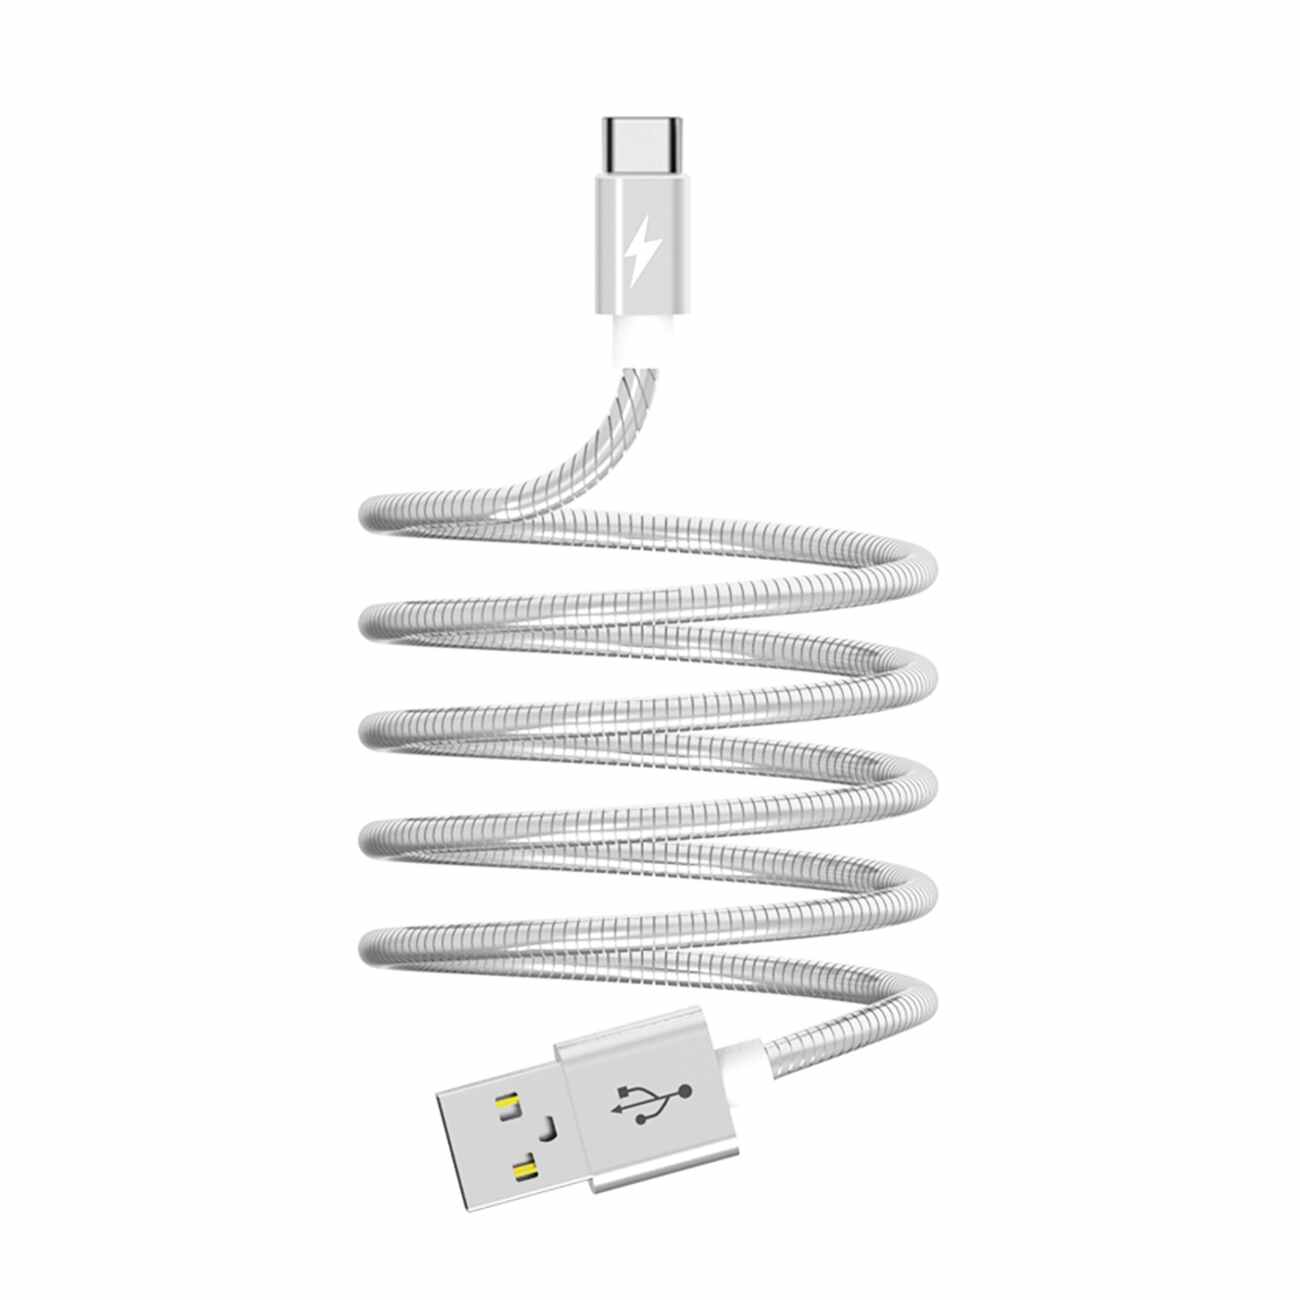 Moisture 2.6A Premium Full Hi-Speed Data Cable In Silver